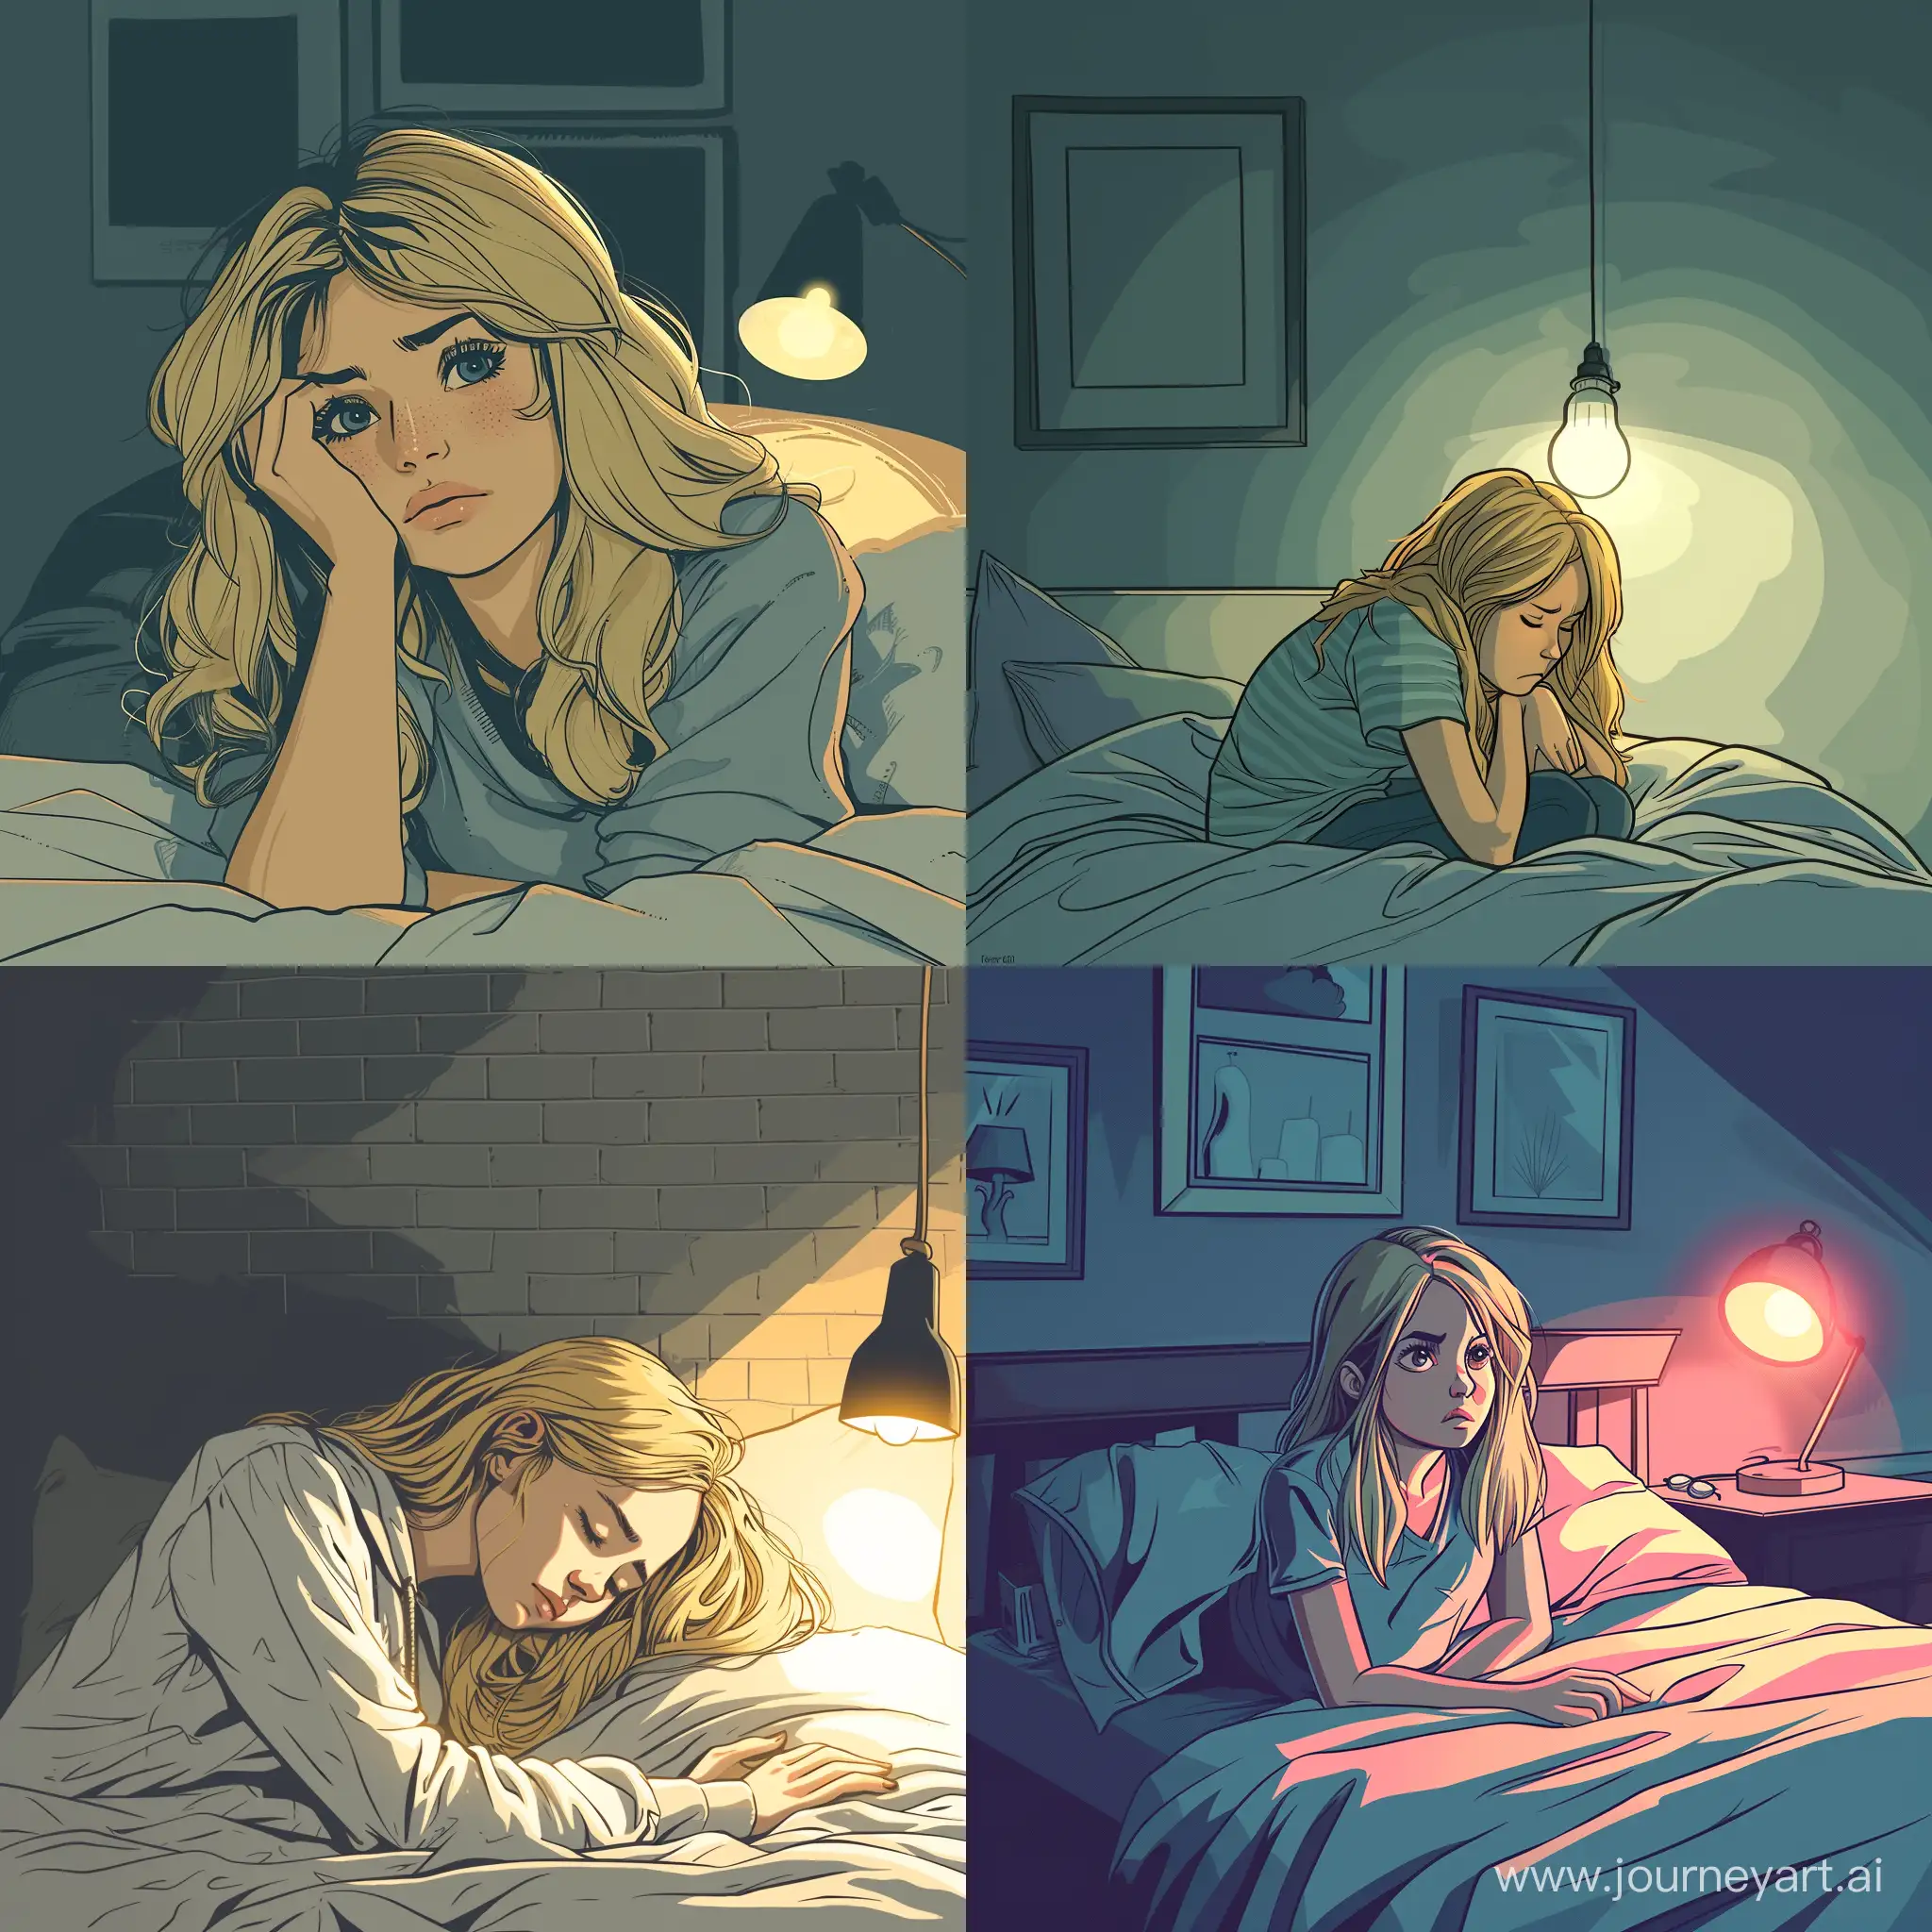 A girl with blond hair is tired at home, she goes to bed, room has little lighting, modern american comic book style.
